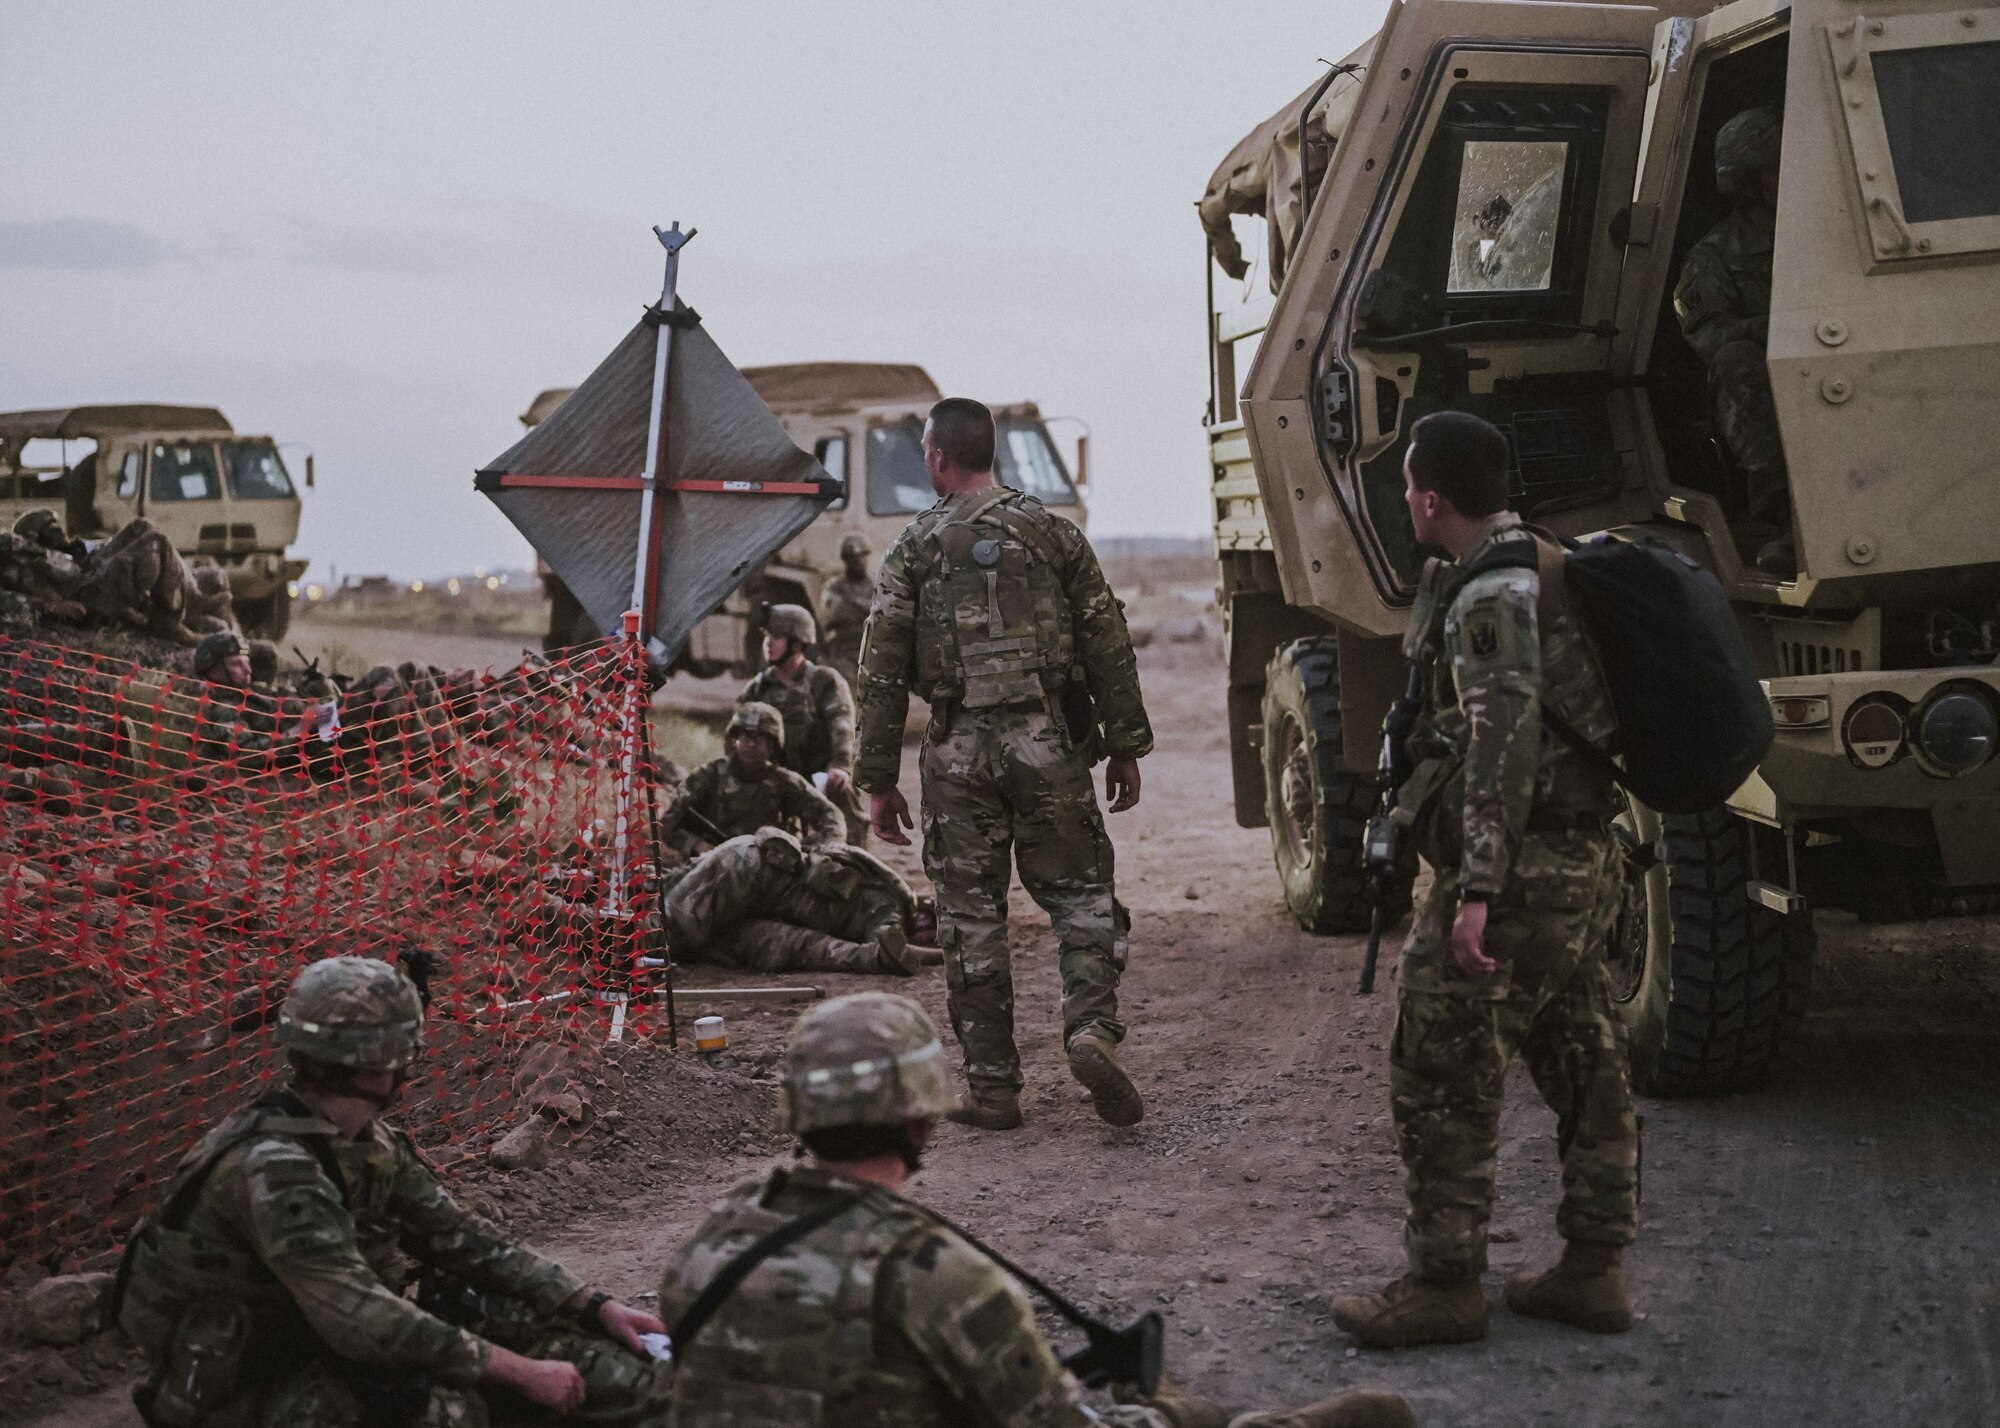 Soldiers from Task Force Iron Gray prepare for the medical evacuation exercise May 31, 2021 at Chabelley Airfield, Djibouti. The exercise included the 776th EABS fire department, medical aid station along with the Task Force Iron Gray, Combined Joint Task Force- Horn of Africa, personnel recovery coordination center and the French Air Force. (U. S. Air Force photo by Airman 1st Class Jan K. Valle)